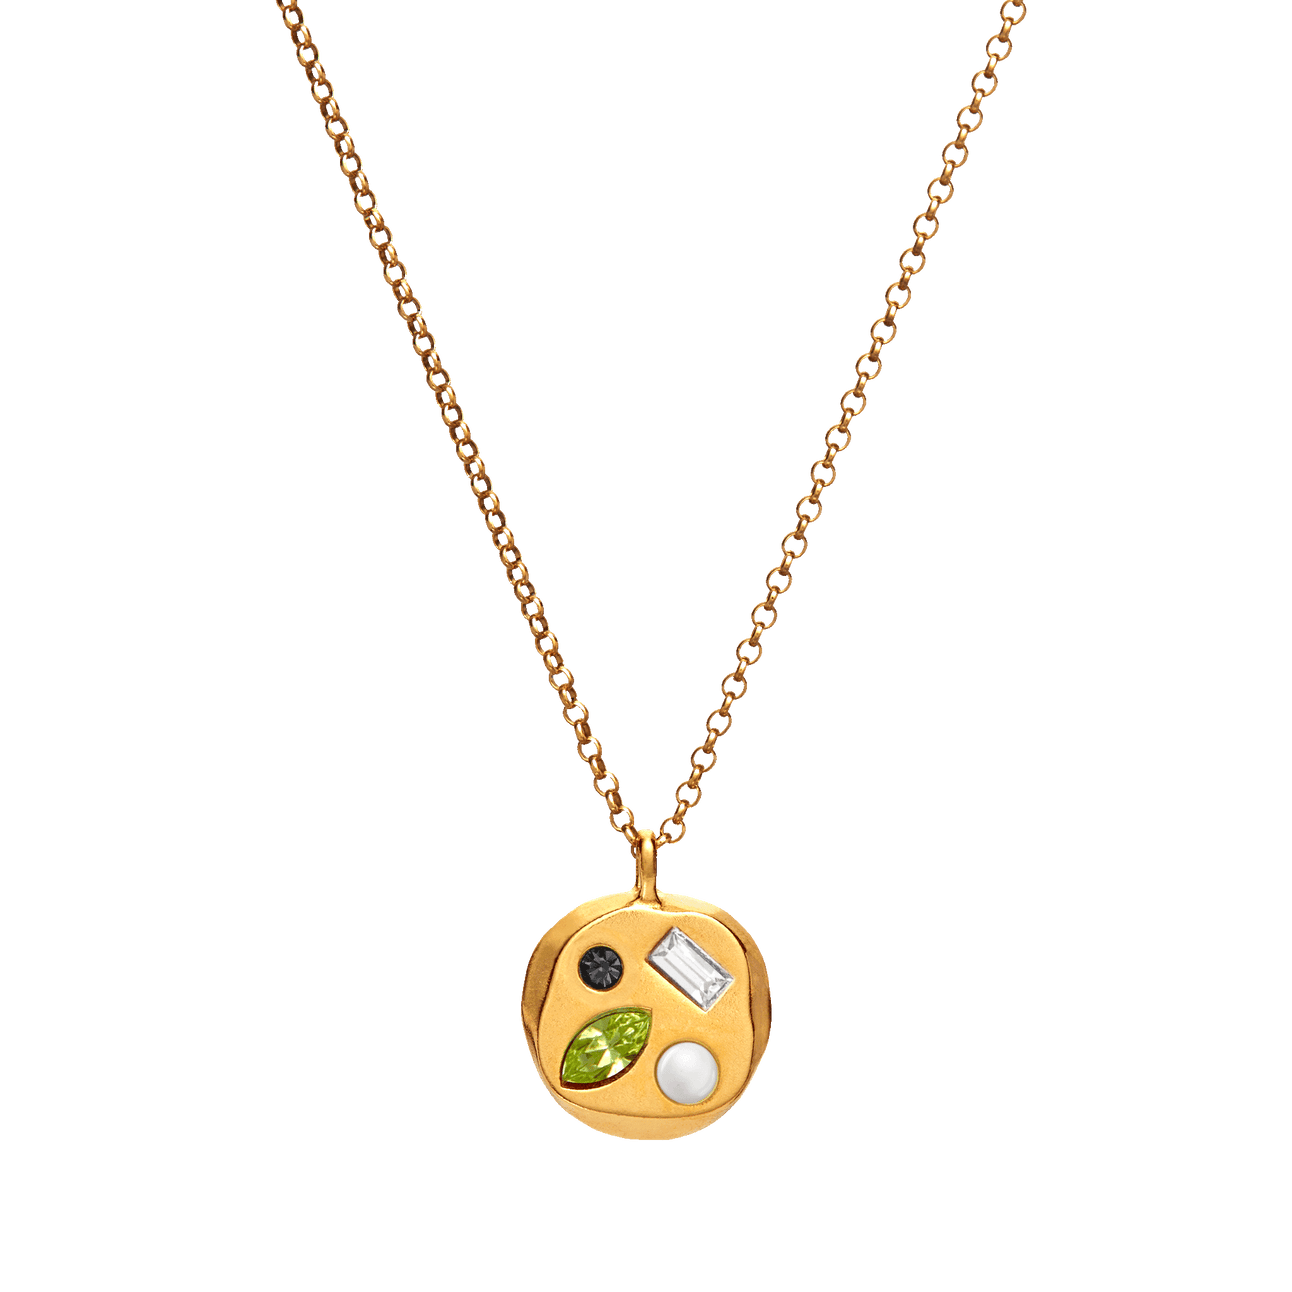 The August Fifth Pendant